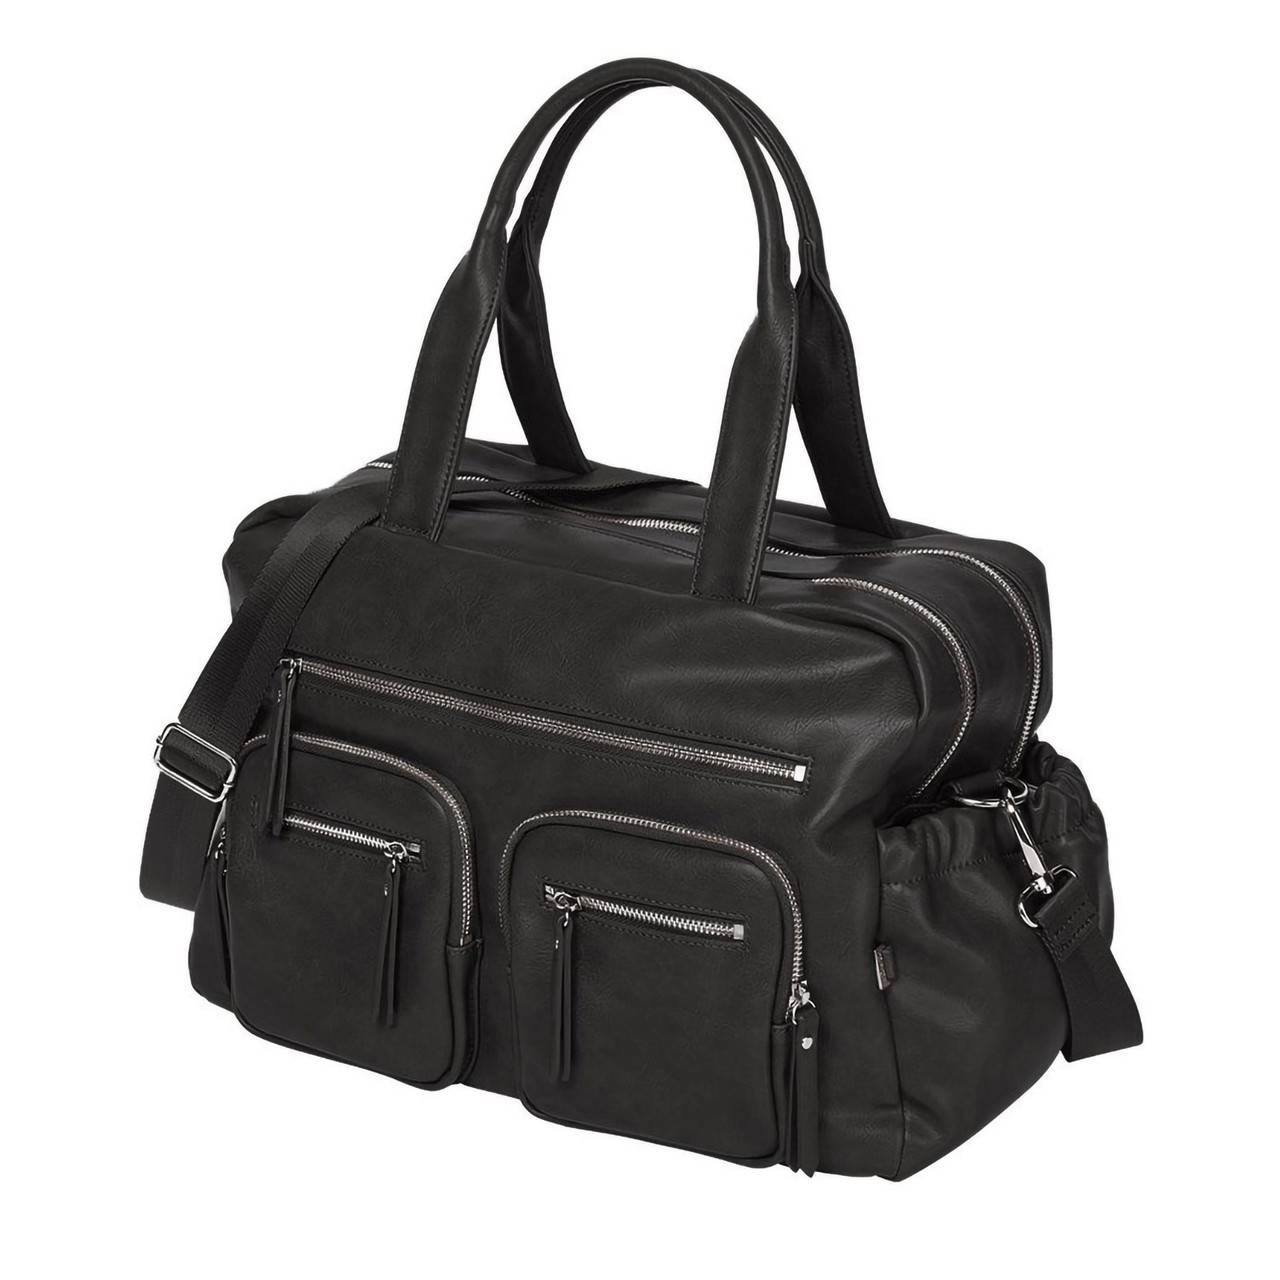 OiOi Faux Leather Black Carry All Nappy Bag. Shop Unisex Baby Bags Online